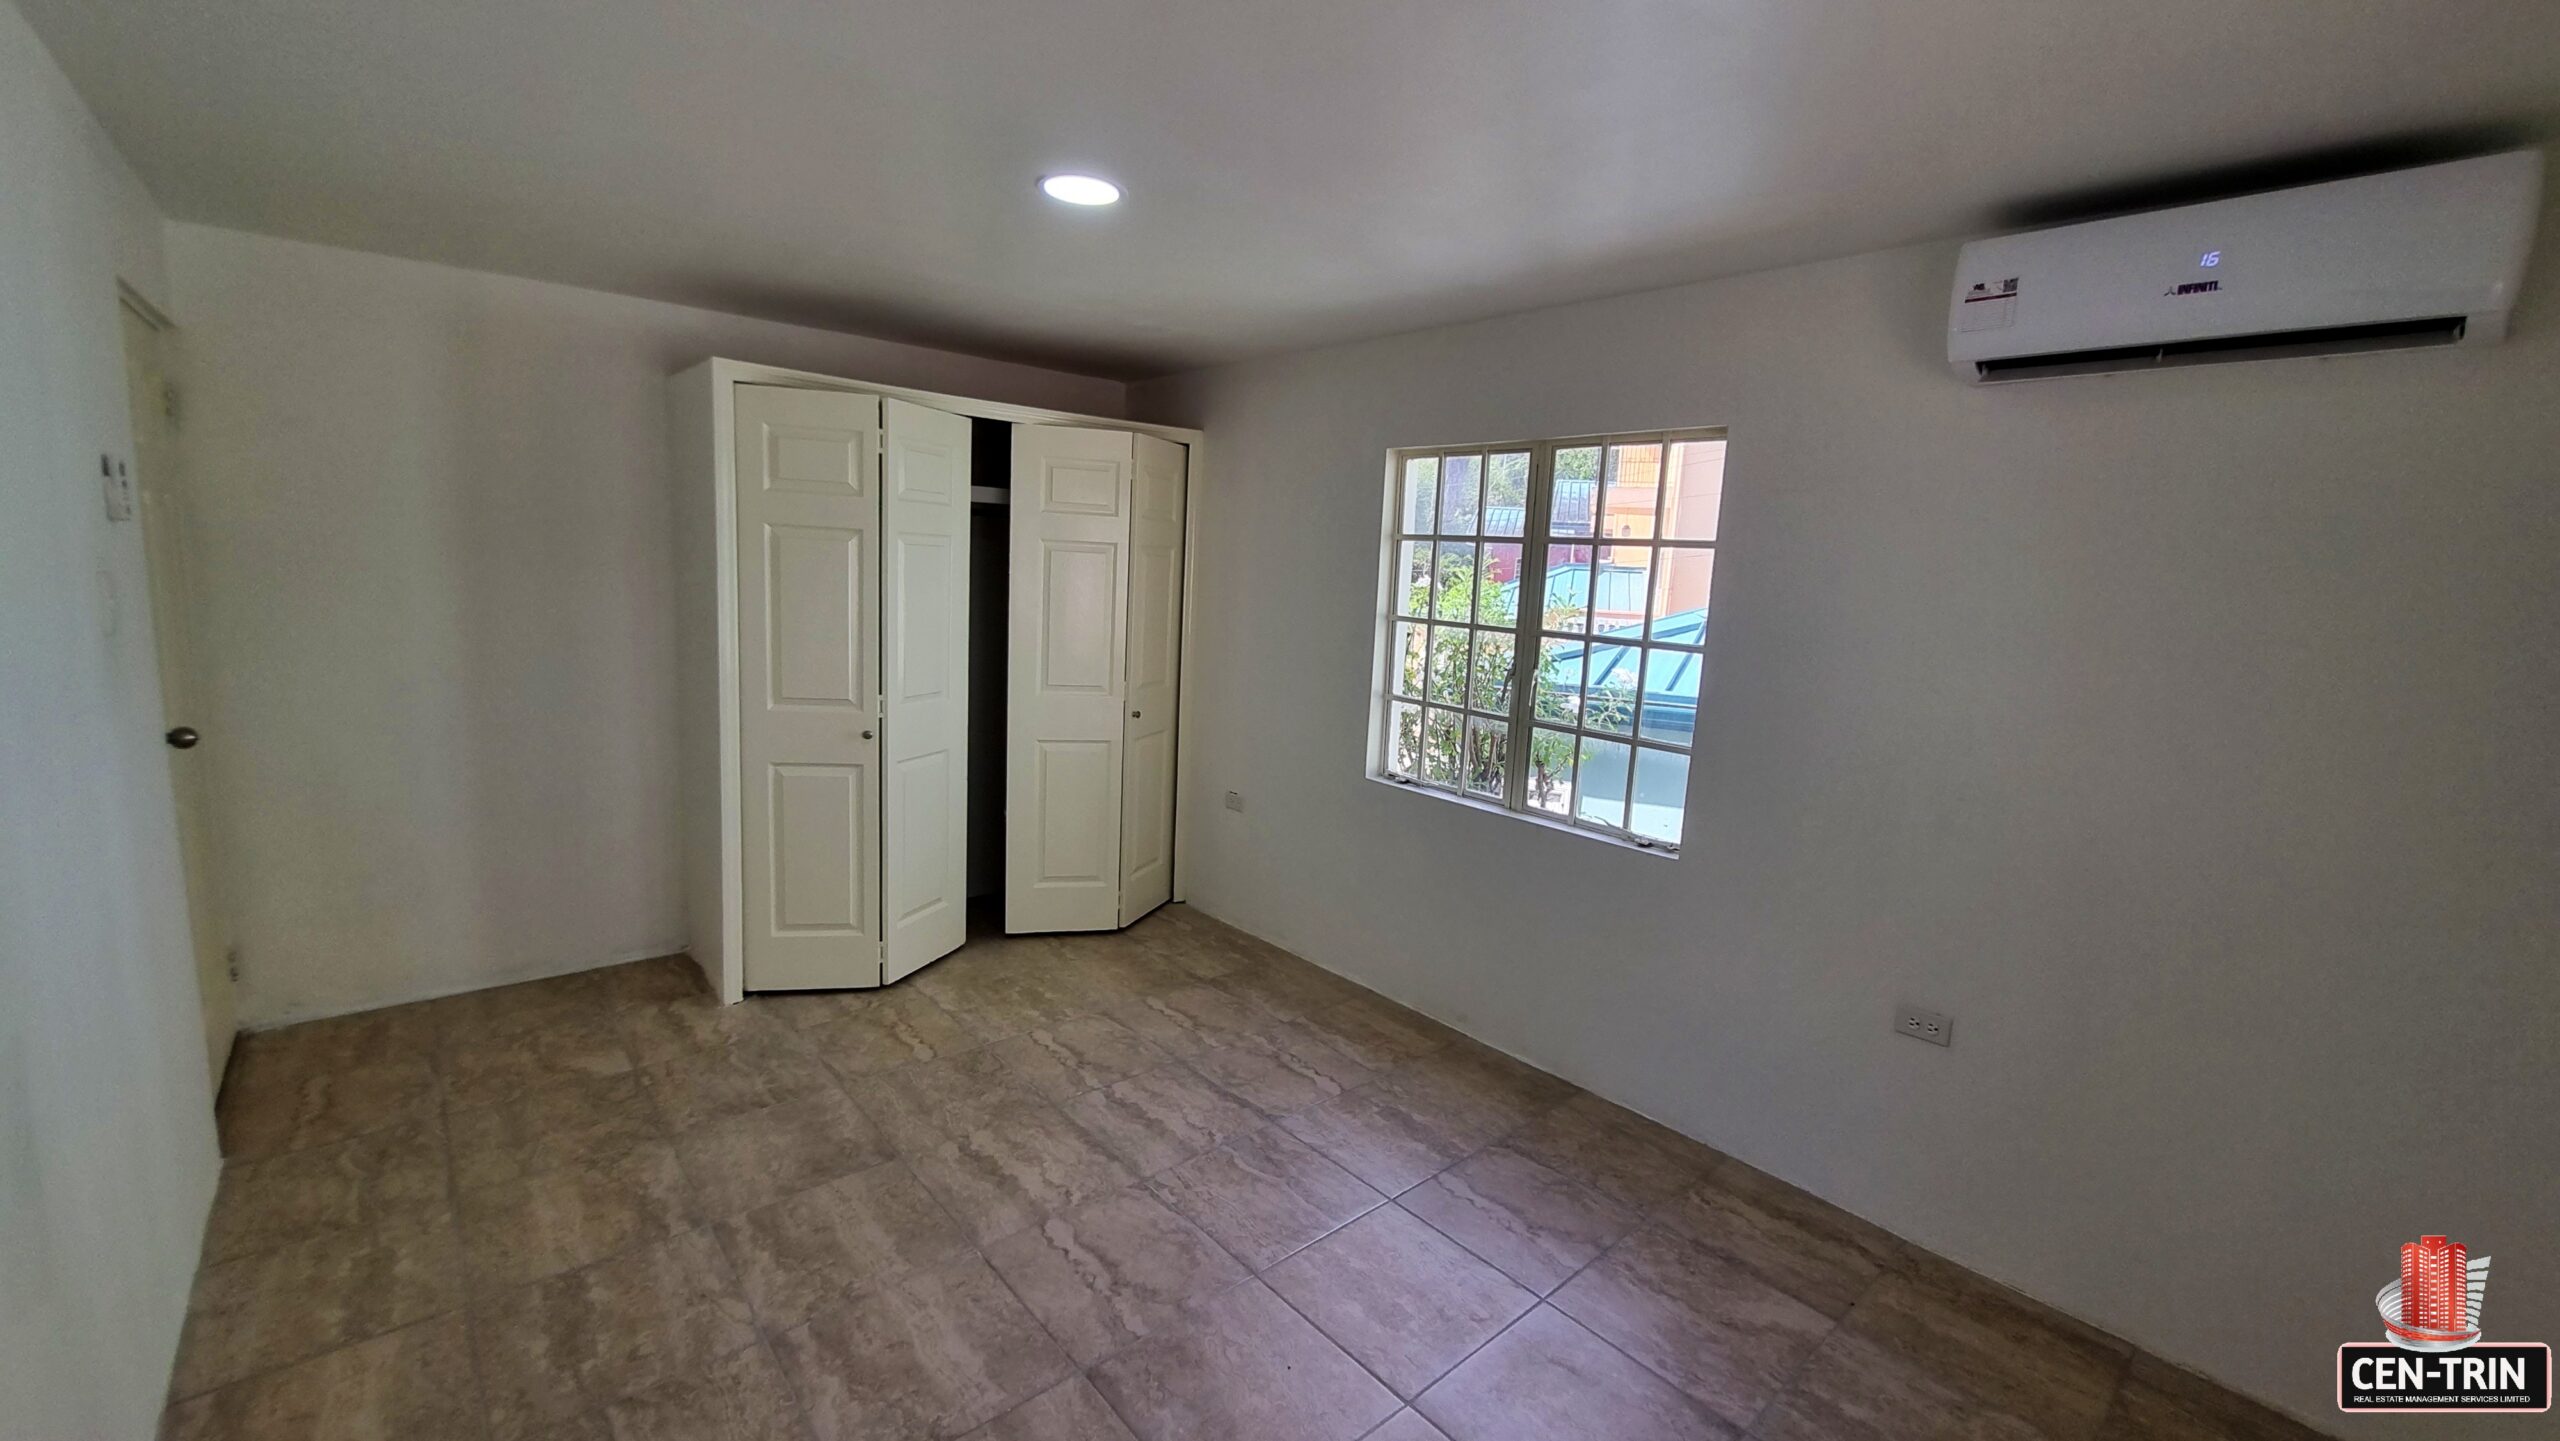 Bedroom with closet, window, and twin bed space in a 3 bedroom townhouse rental.